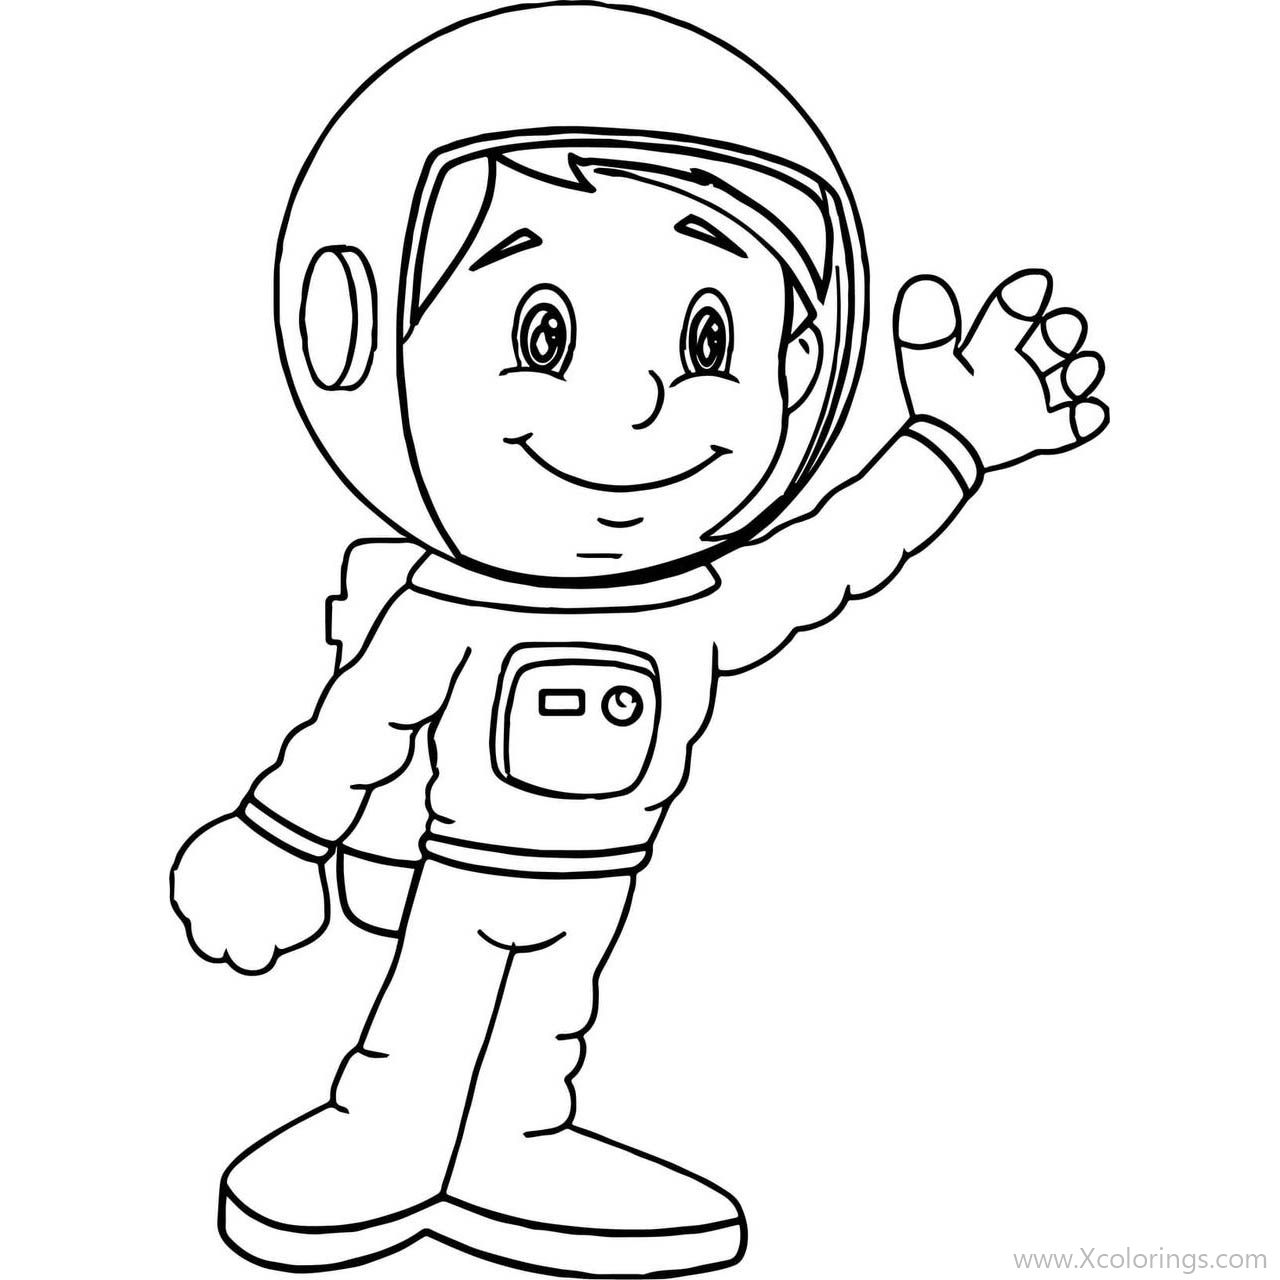 Free Astronaut Boy in a Spacesuit Coloring Pages printable